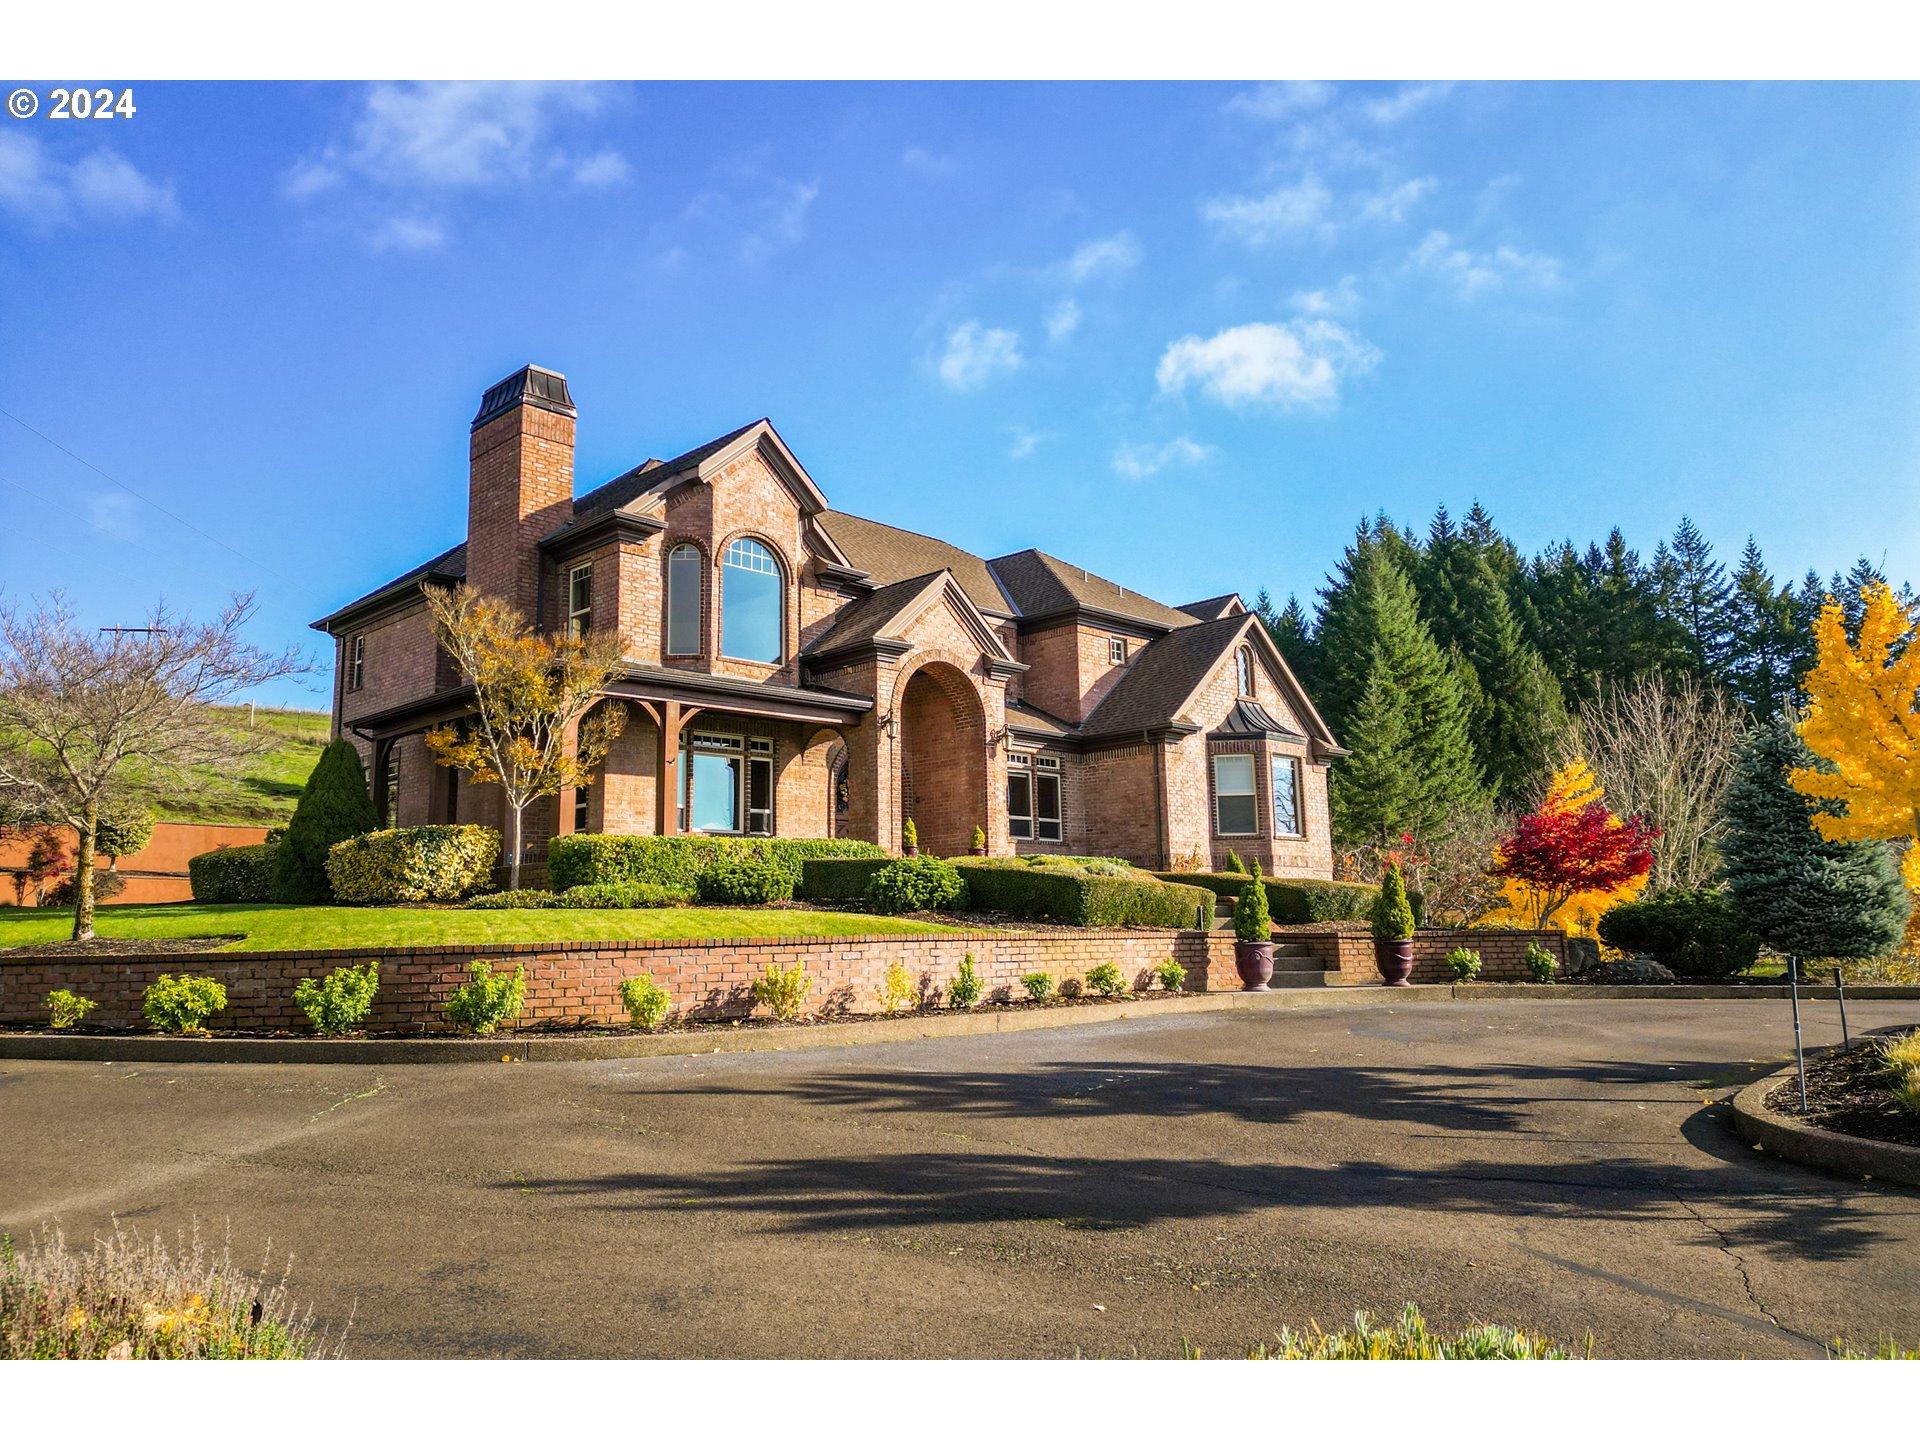 3485 NW DIMPLE HILL RD, Corvallis, OR 97330